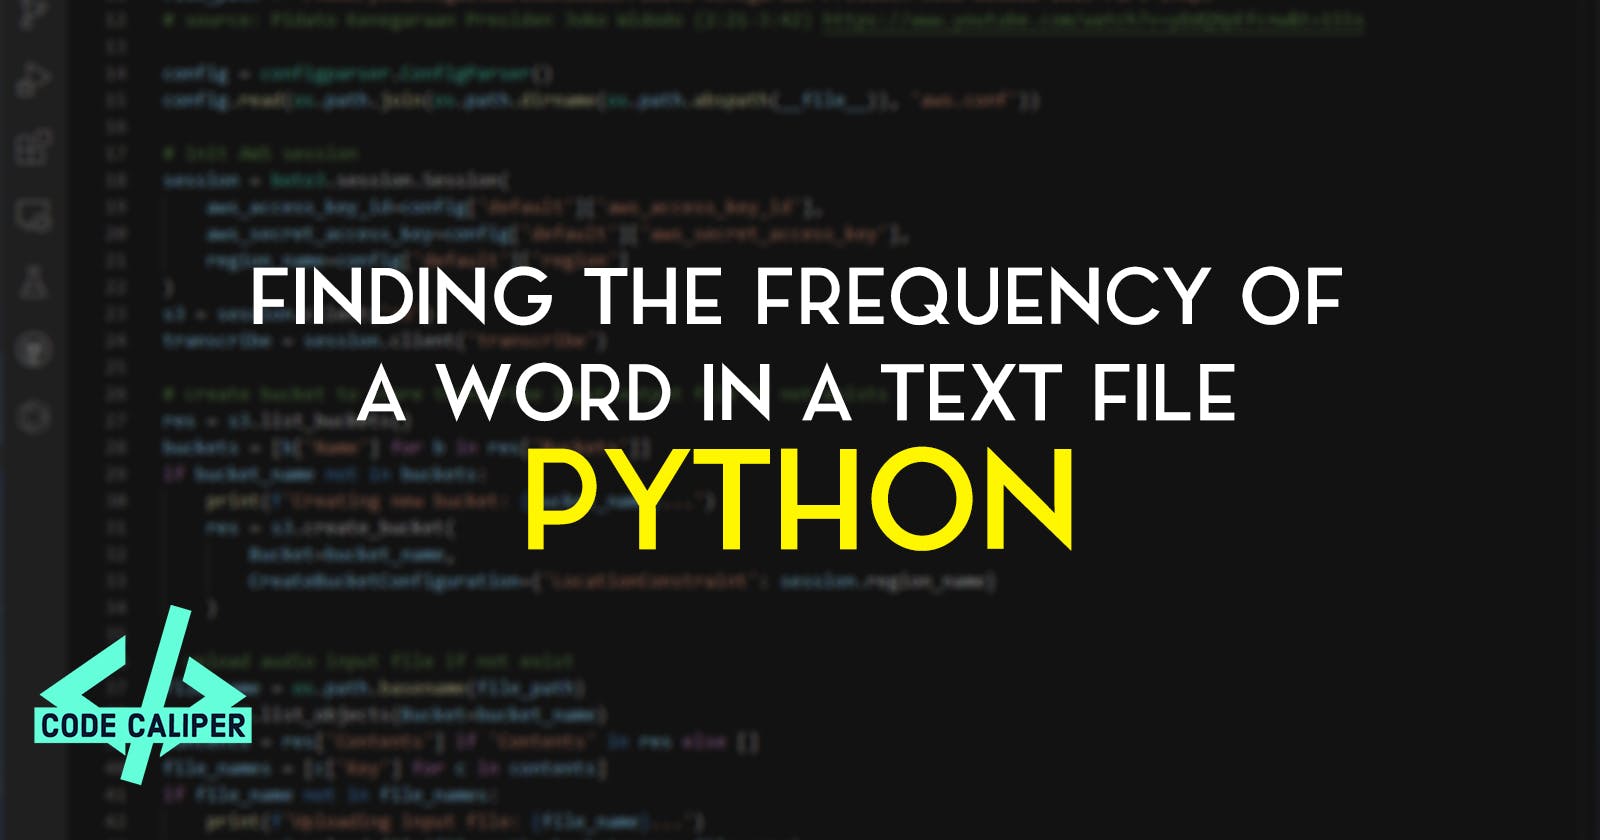 Finding the Frequency of a Word in a Text File with Python